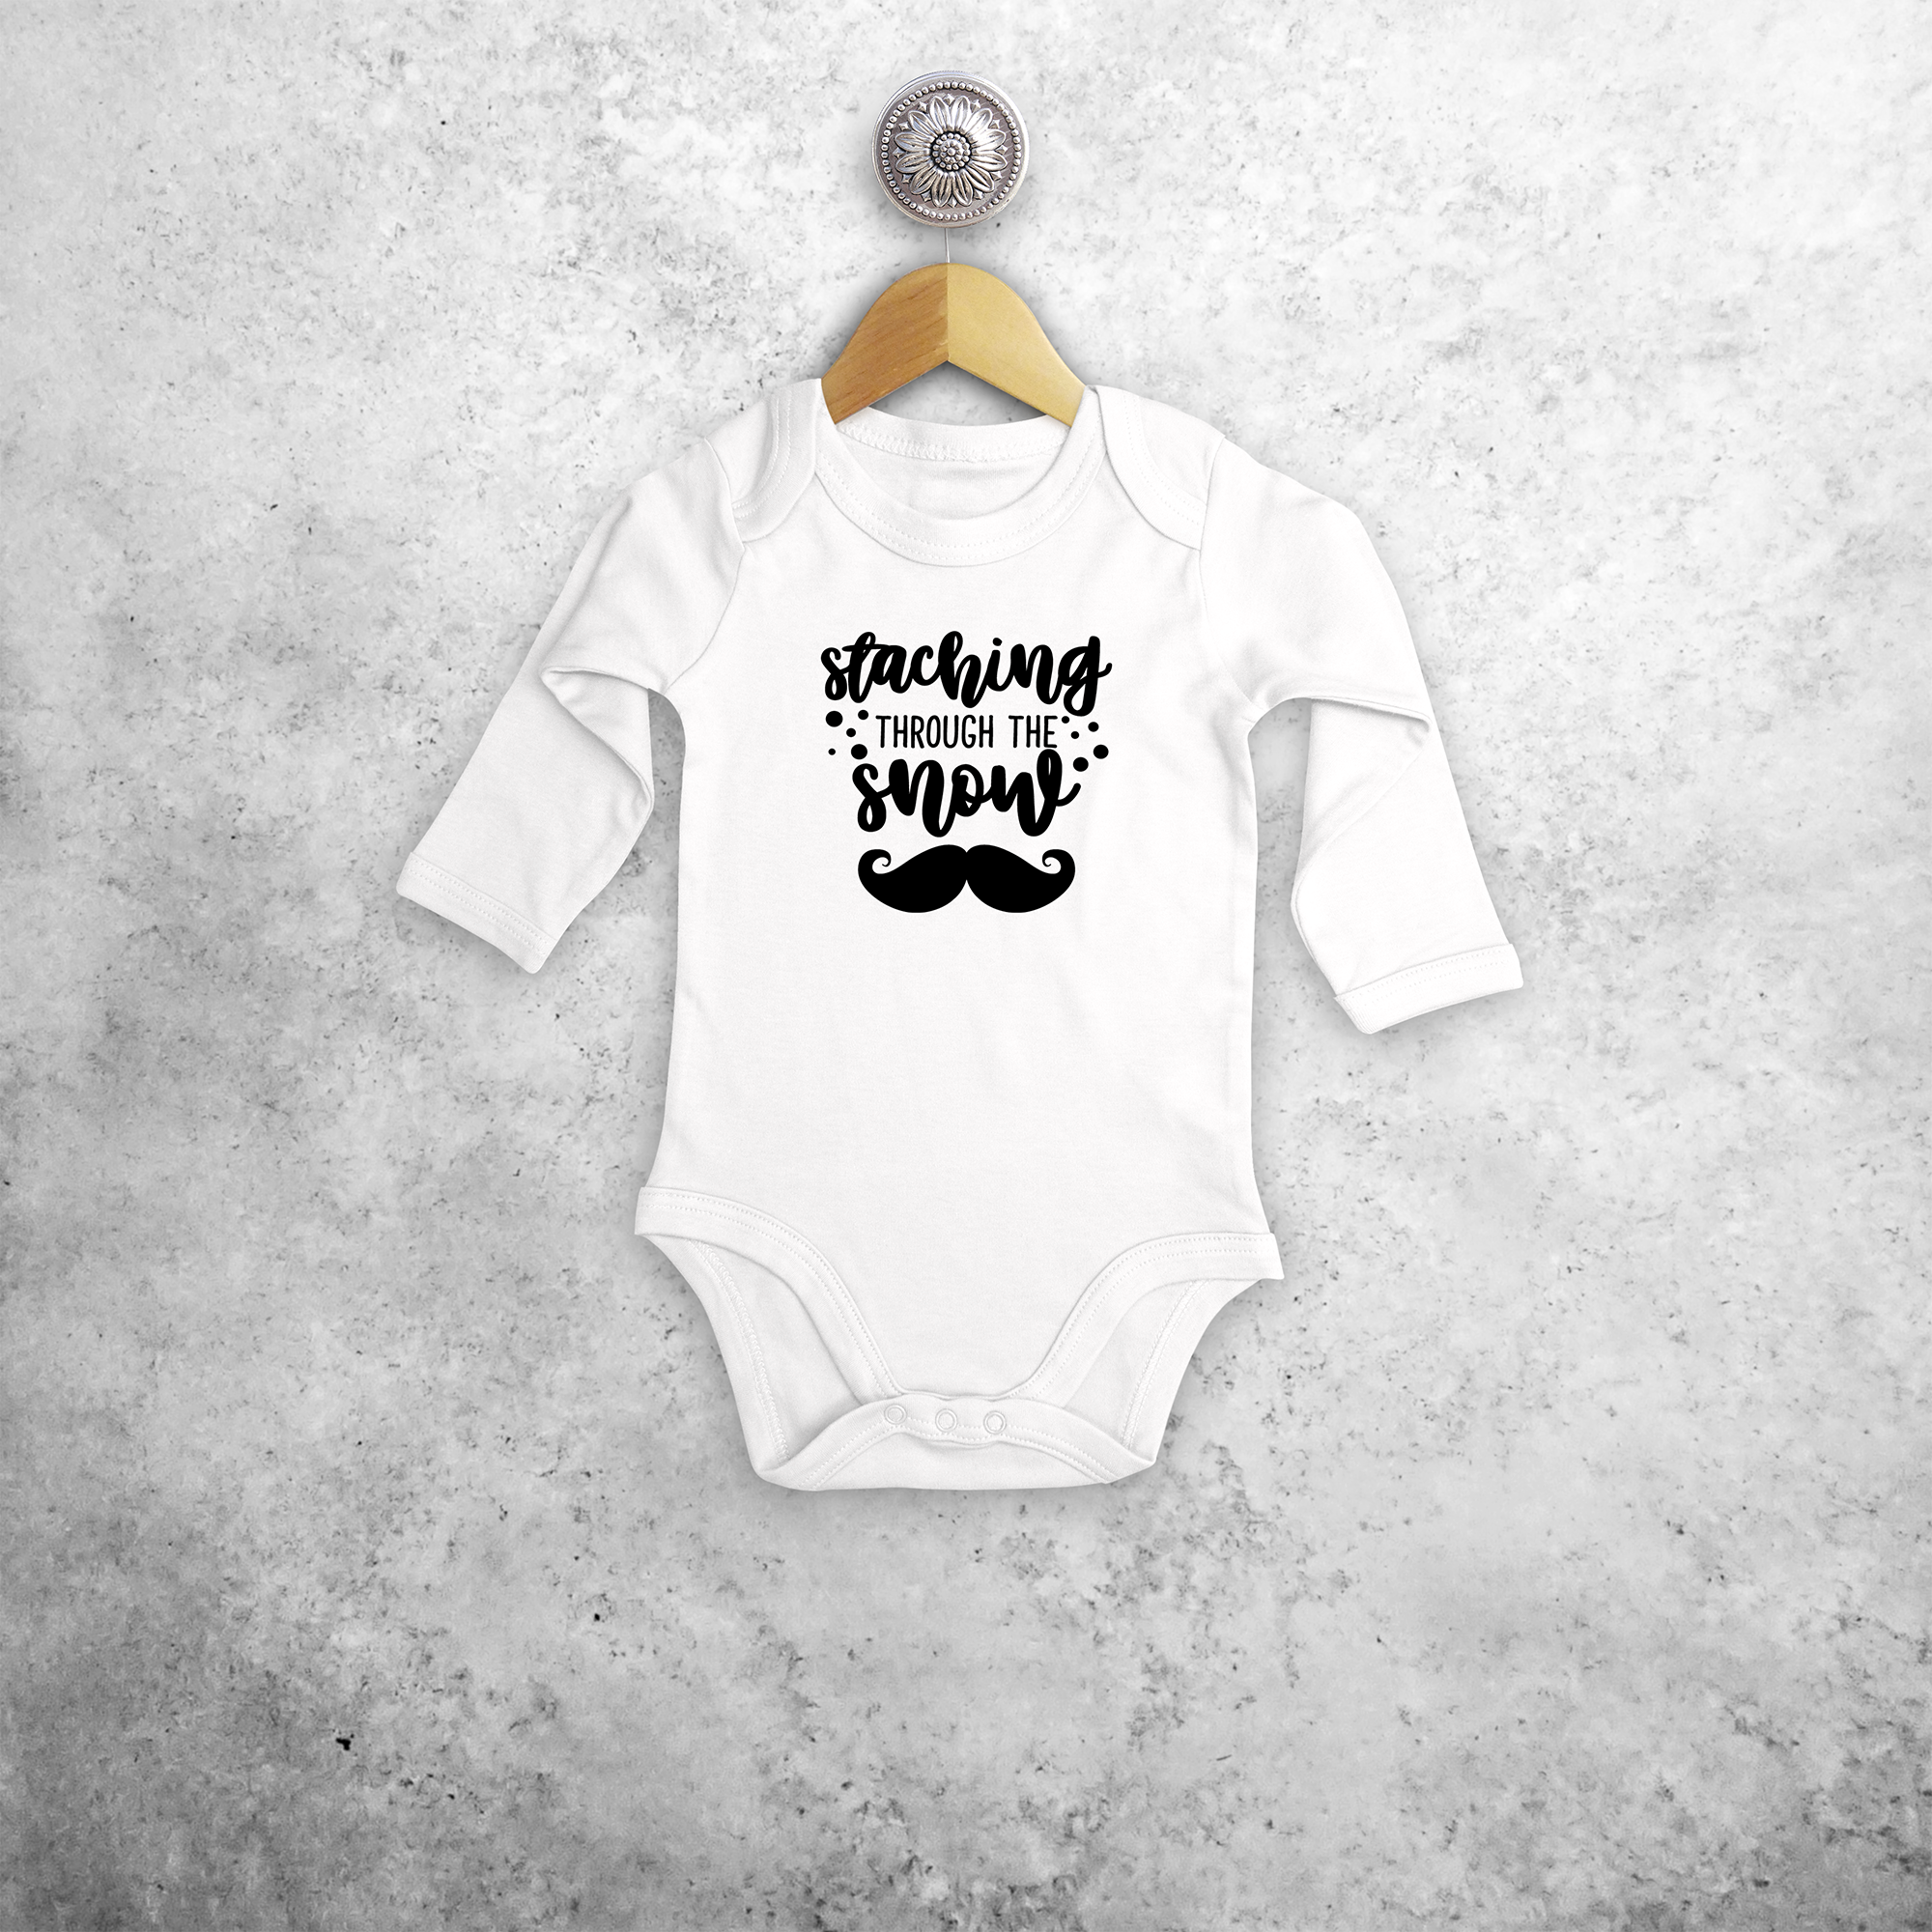 Baby or toddler bodysuit with long sleeves, with ‘Staching through the snow’ print by KMLeon.